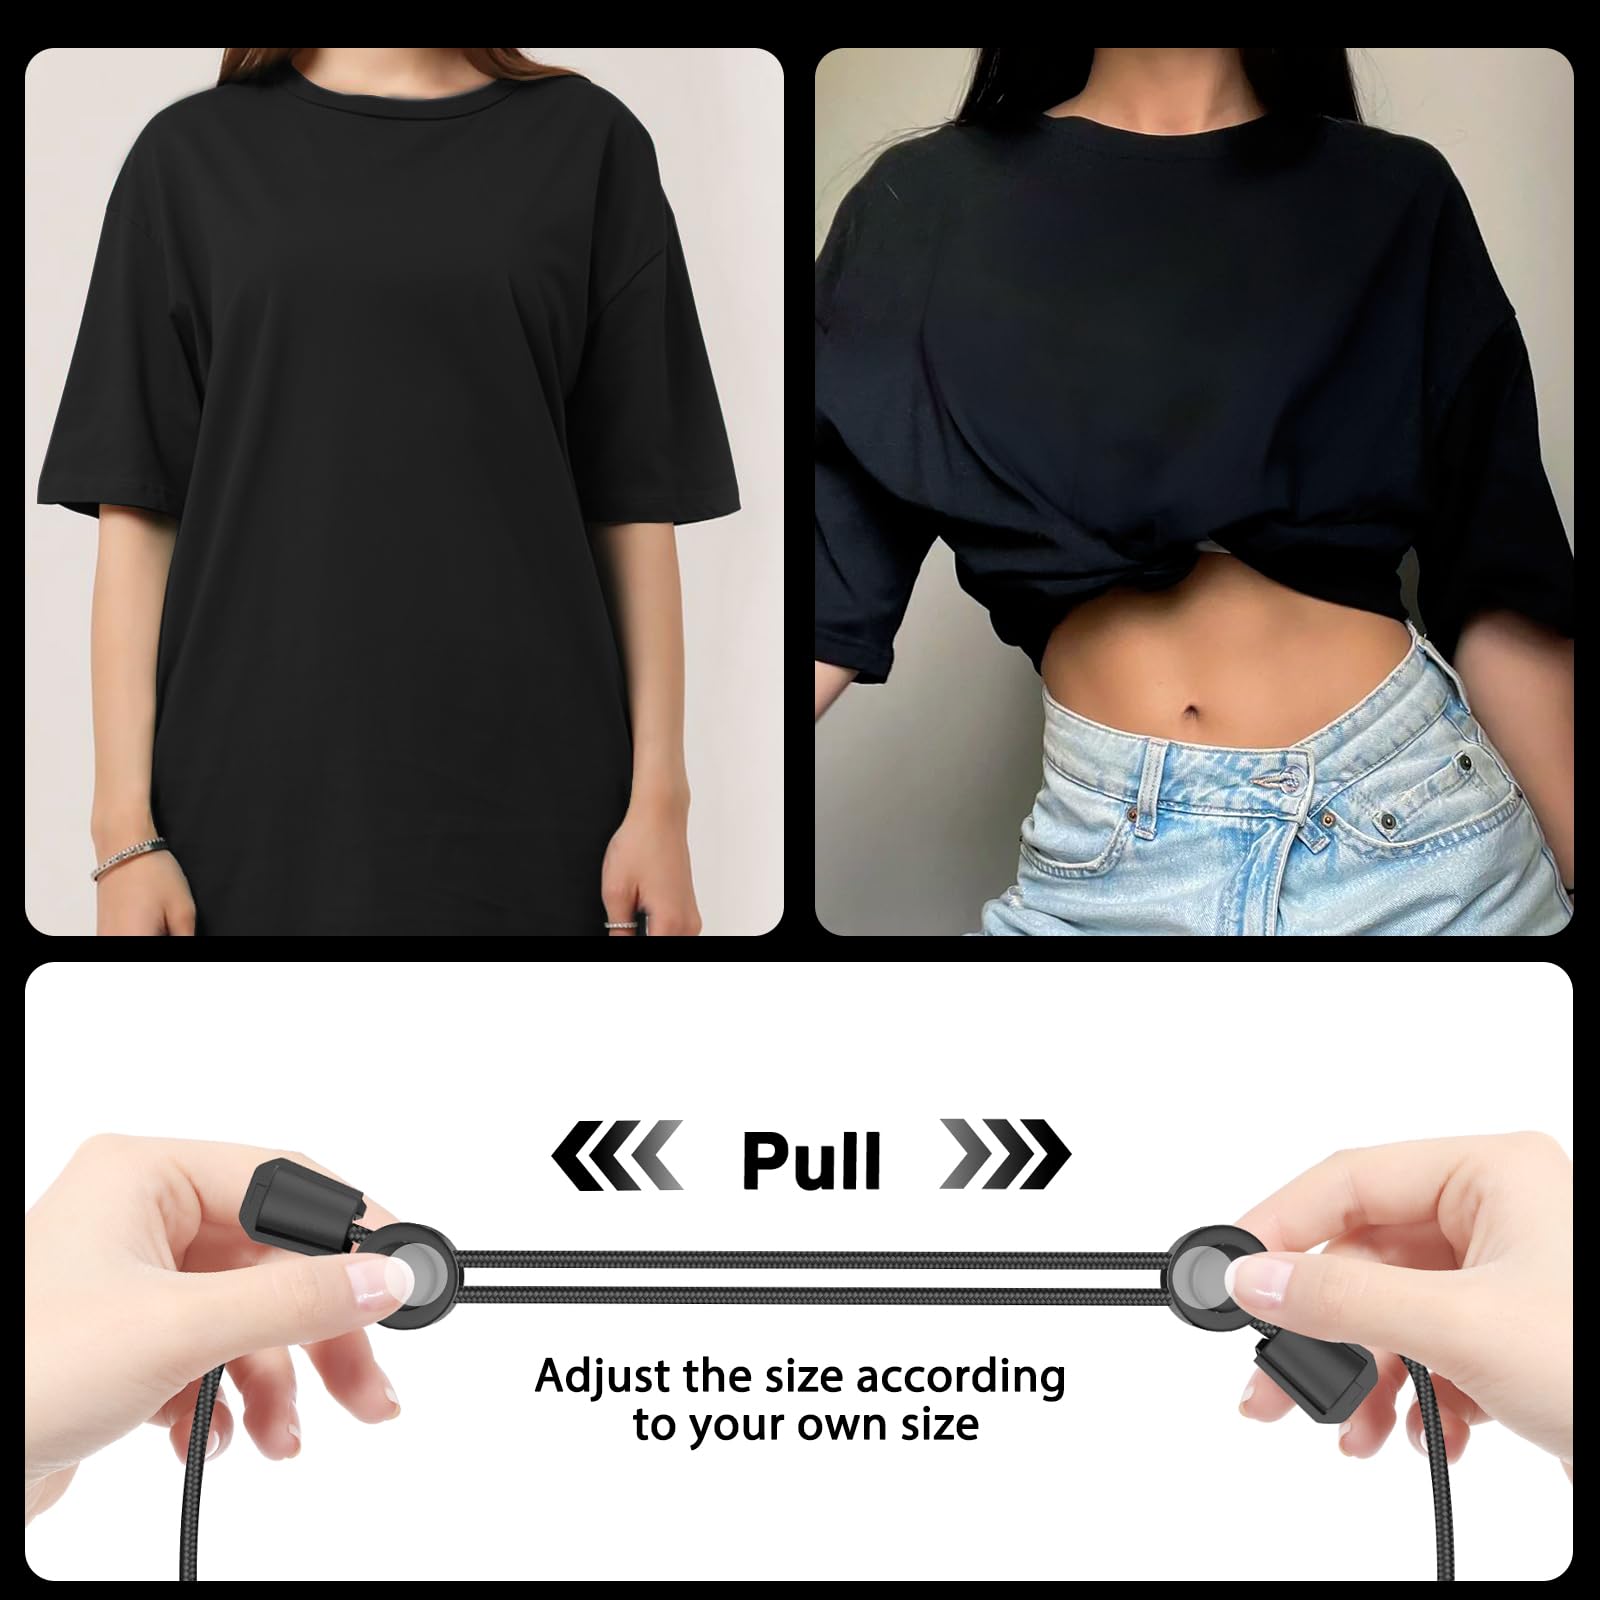 Crop Tuck Adjustable Band, Crop Tuck Tool for Sweater and Shirt, Belly Leaking Crop Tuck Band, The Elastic Band to Change The Style of Your Tops(1PC, Black, Size:Medium)